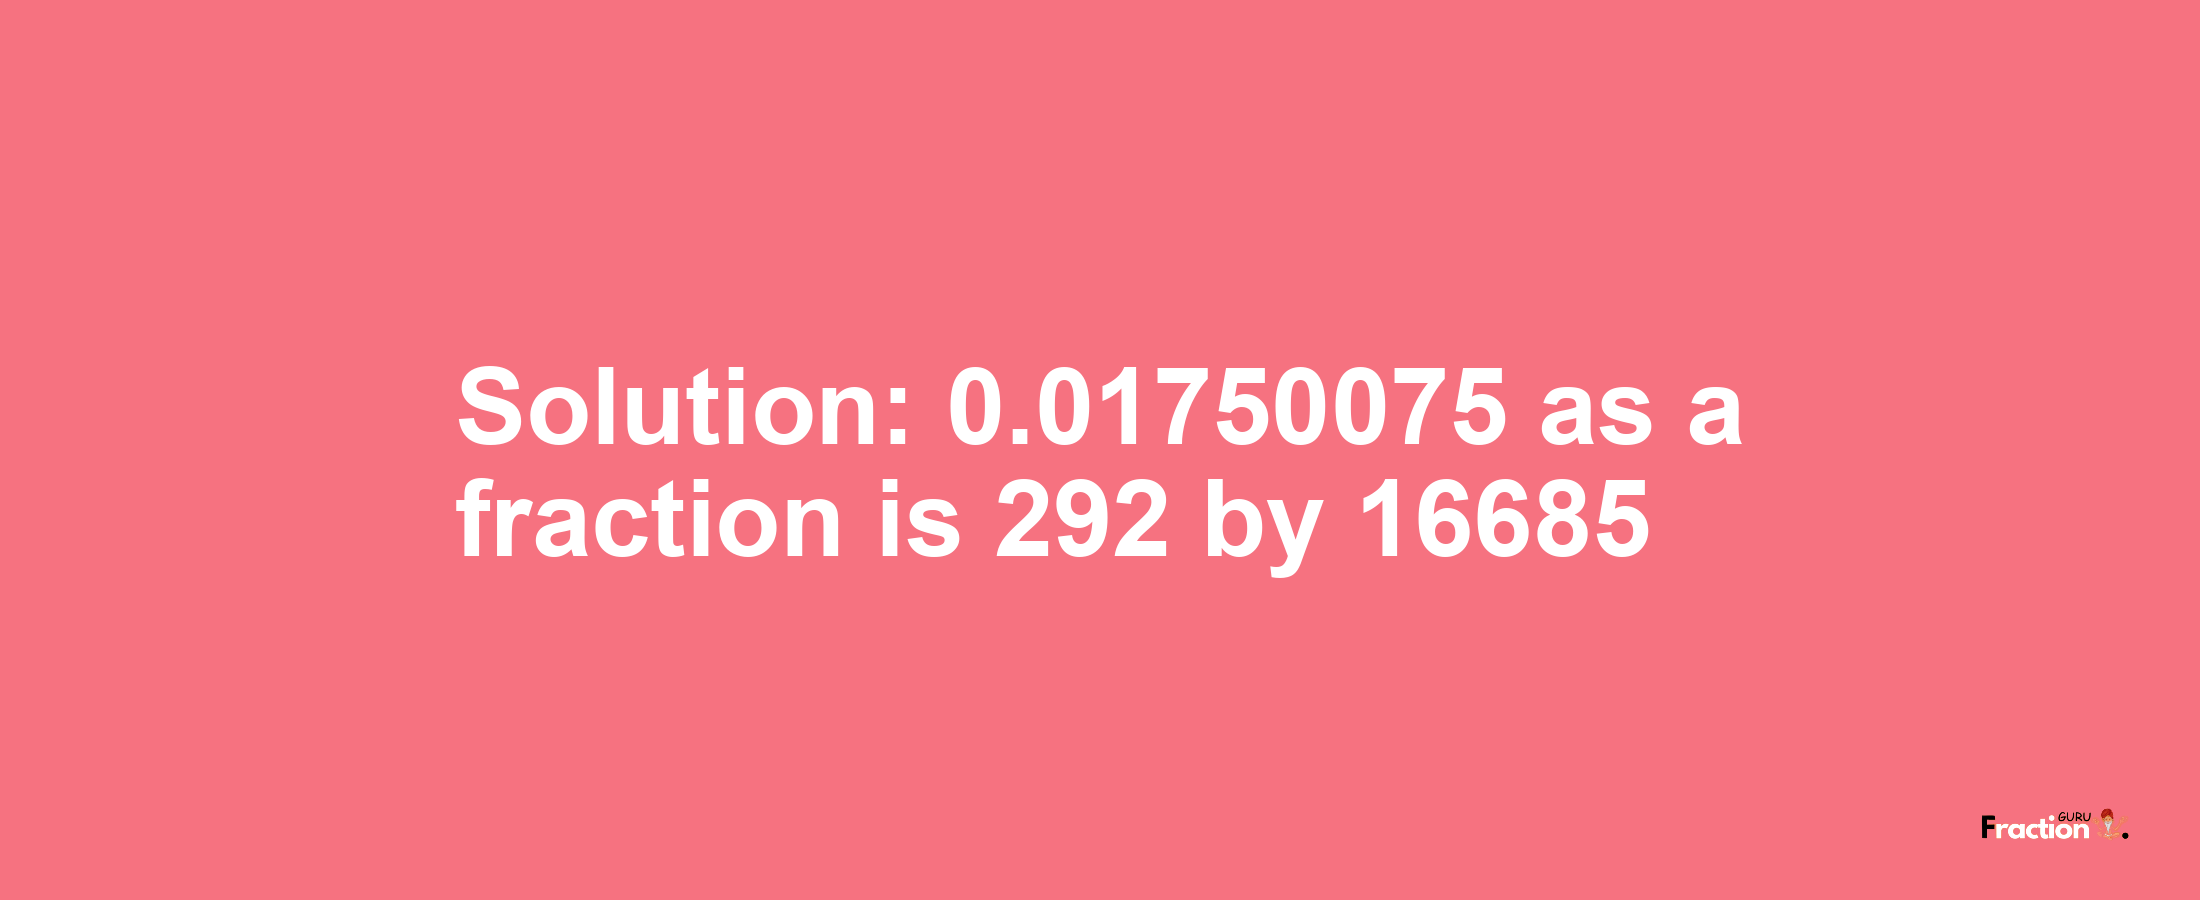 Solution:0.01750075 as a fraction is 292/16685